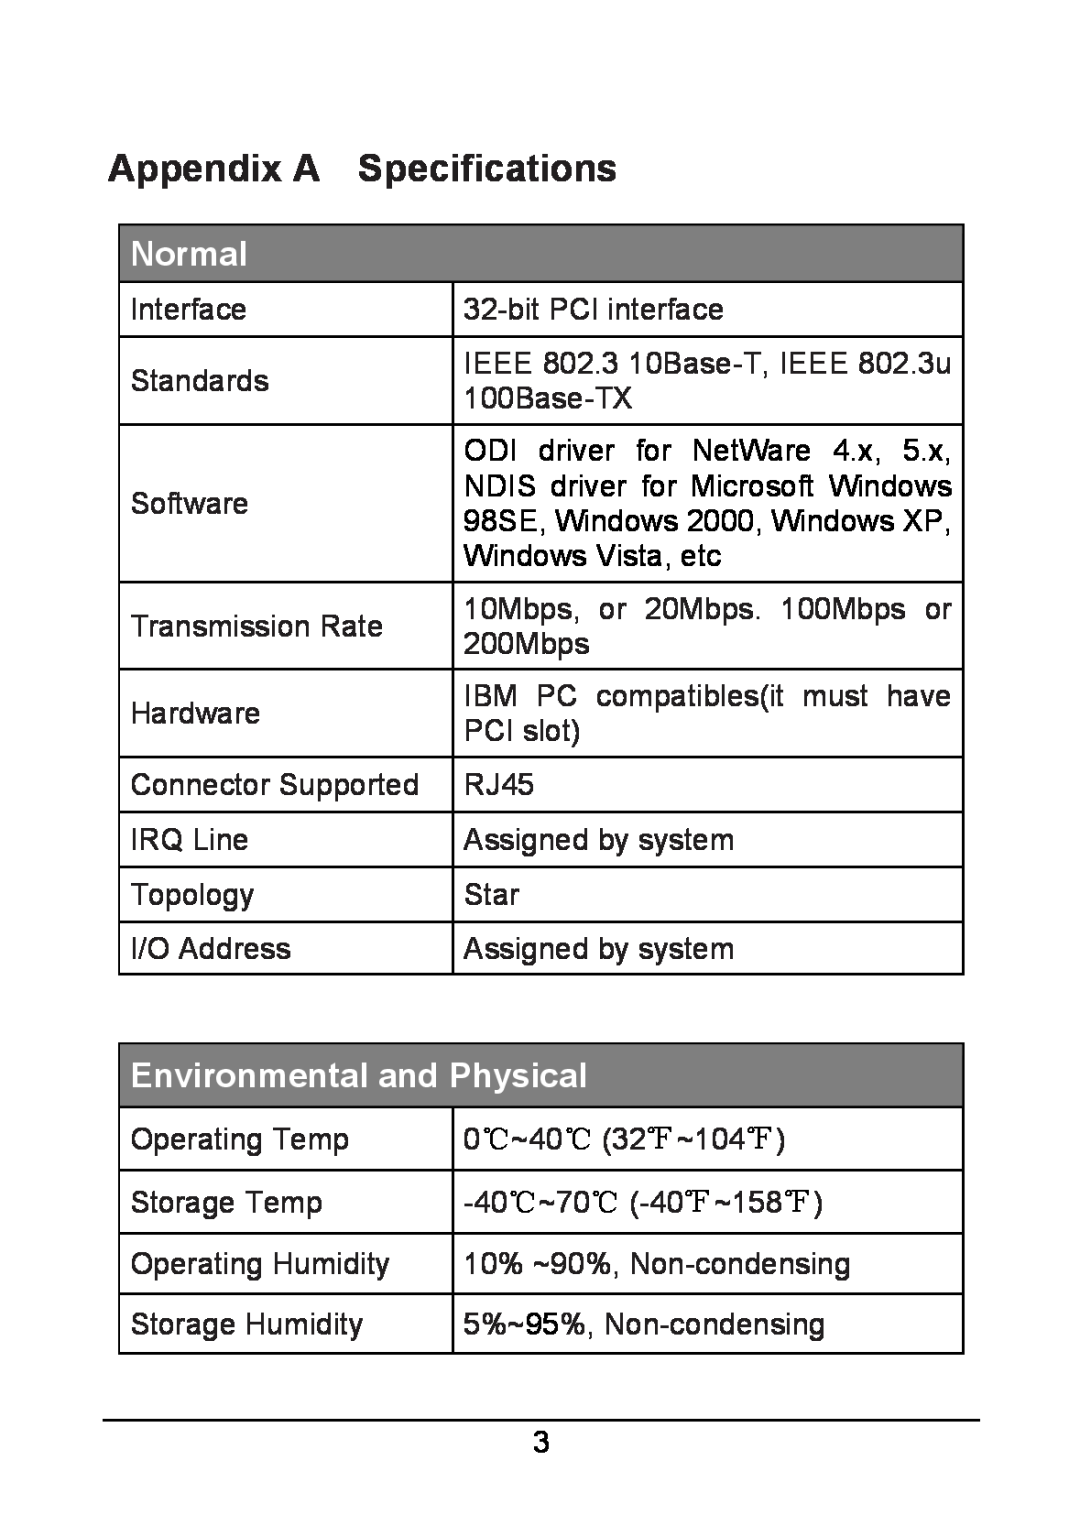 TP-Link TF-3200 manual Appendix A Specifications, Normal, Environmental and Physical 